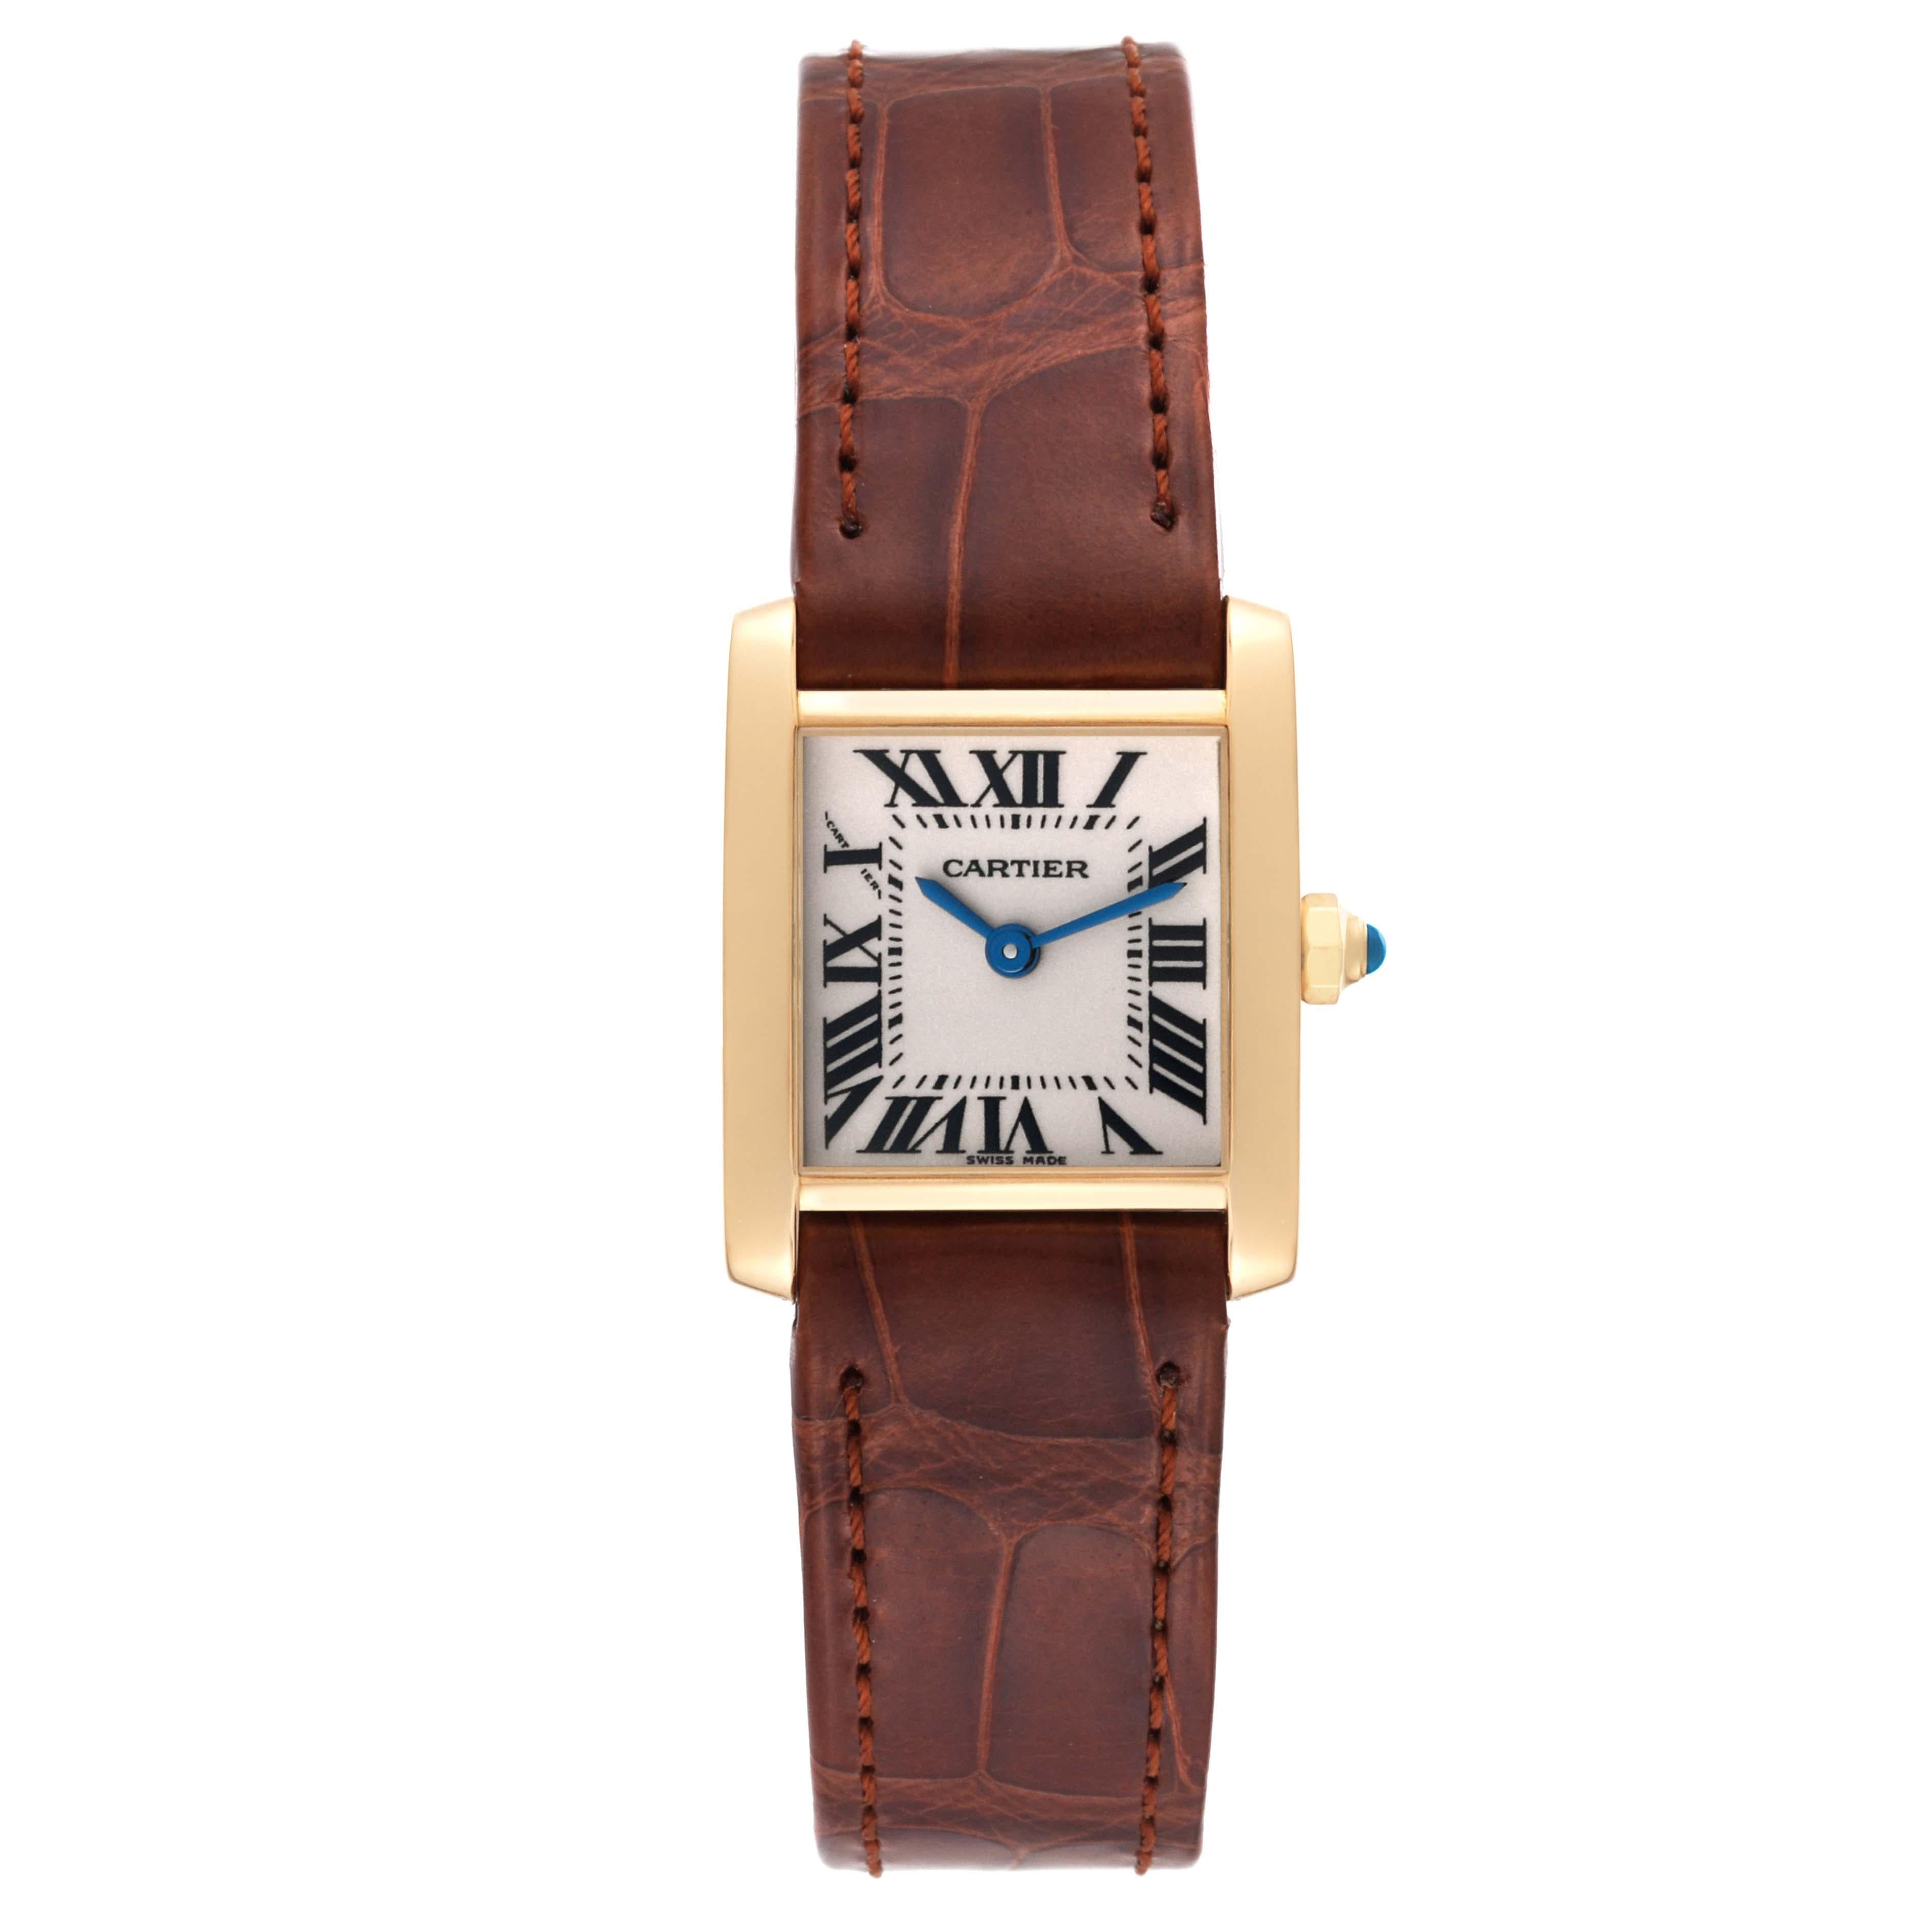 Cartier Tank Francaise Yellow Gold Brown Strap Ladies Watch W5000256. Quartz movement. 18K yellow gold rectangular case 20.0 x 25.0 mm case. Octagonal crown set with a blue sapphire cabochon. . Scratch resistant sapphire crystal. Silver dial with